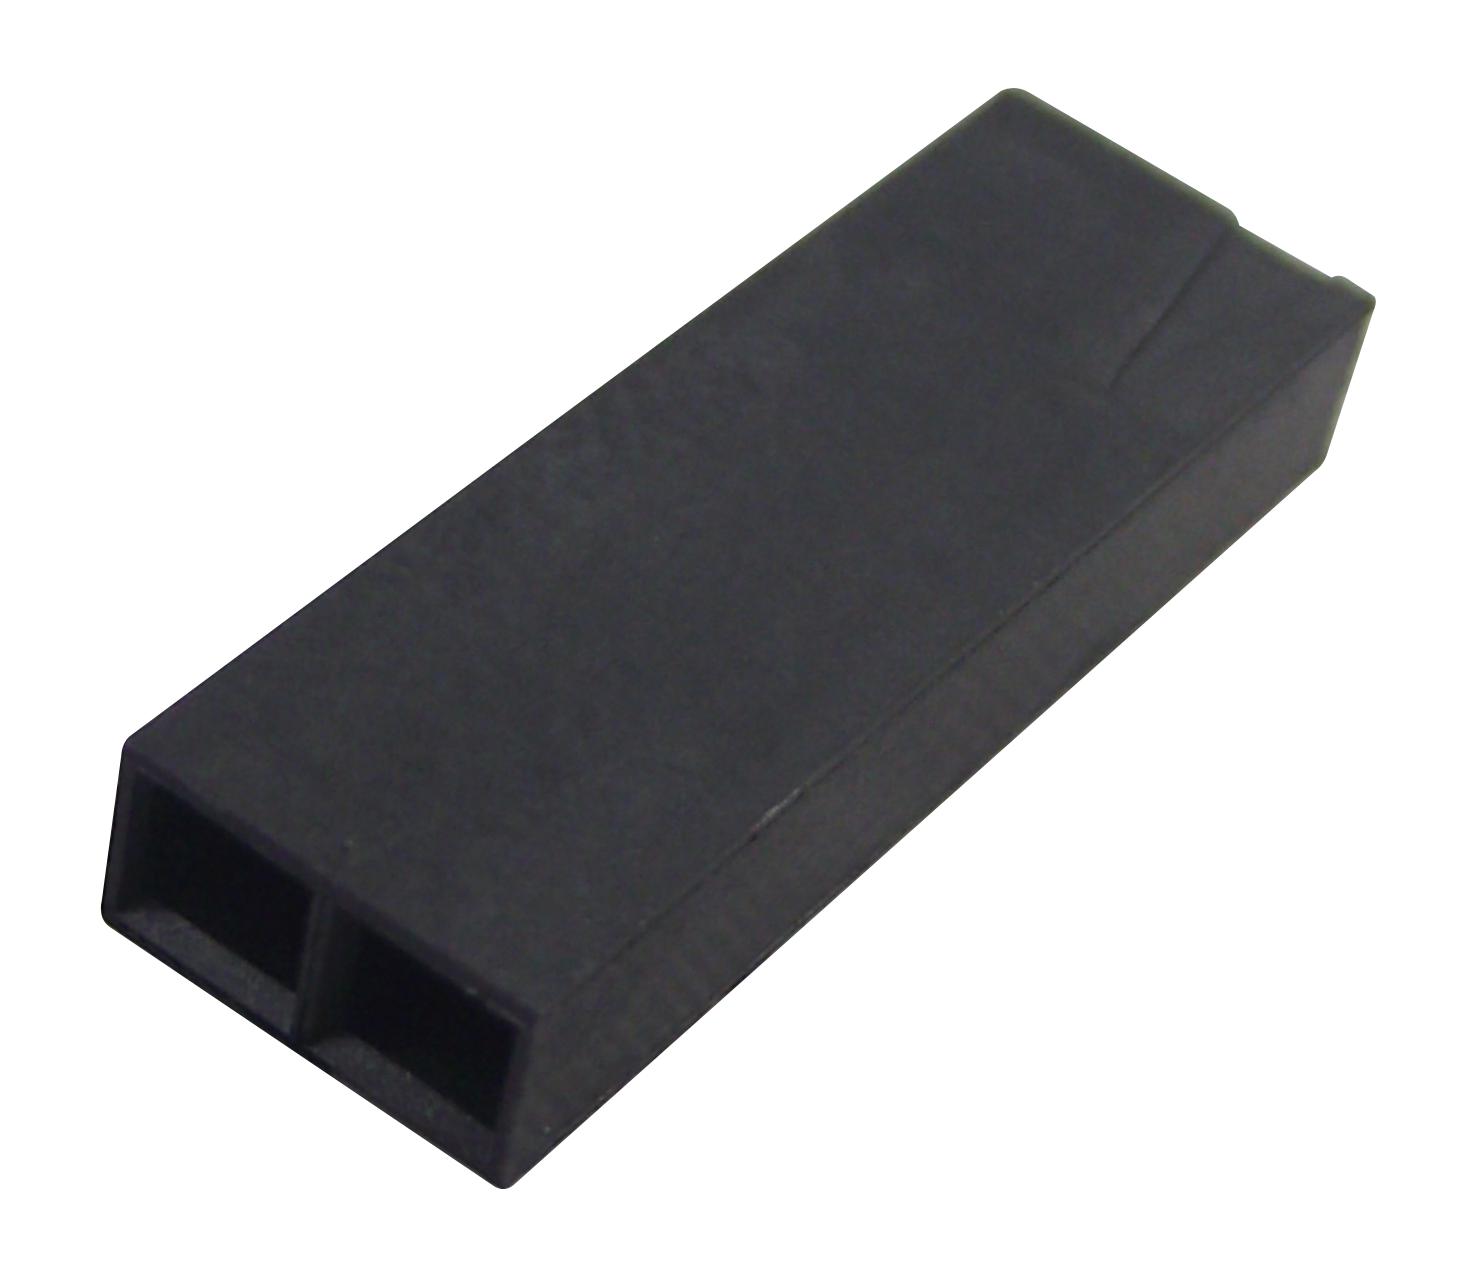 103648-1 CONNECTOR, HOUSING, RCPT, 2POS, 1ROW AMP - TE CONNECTIVITY